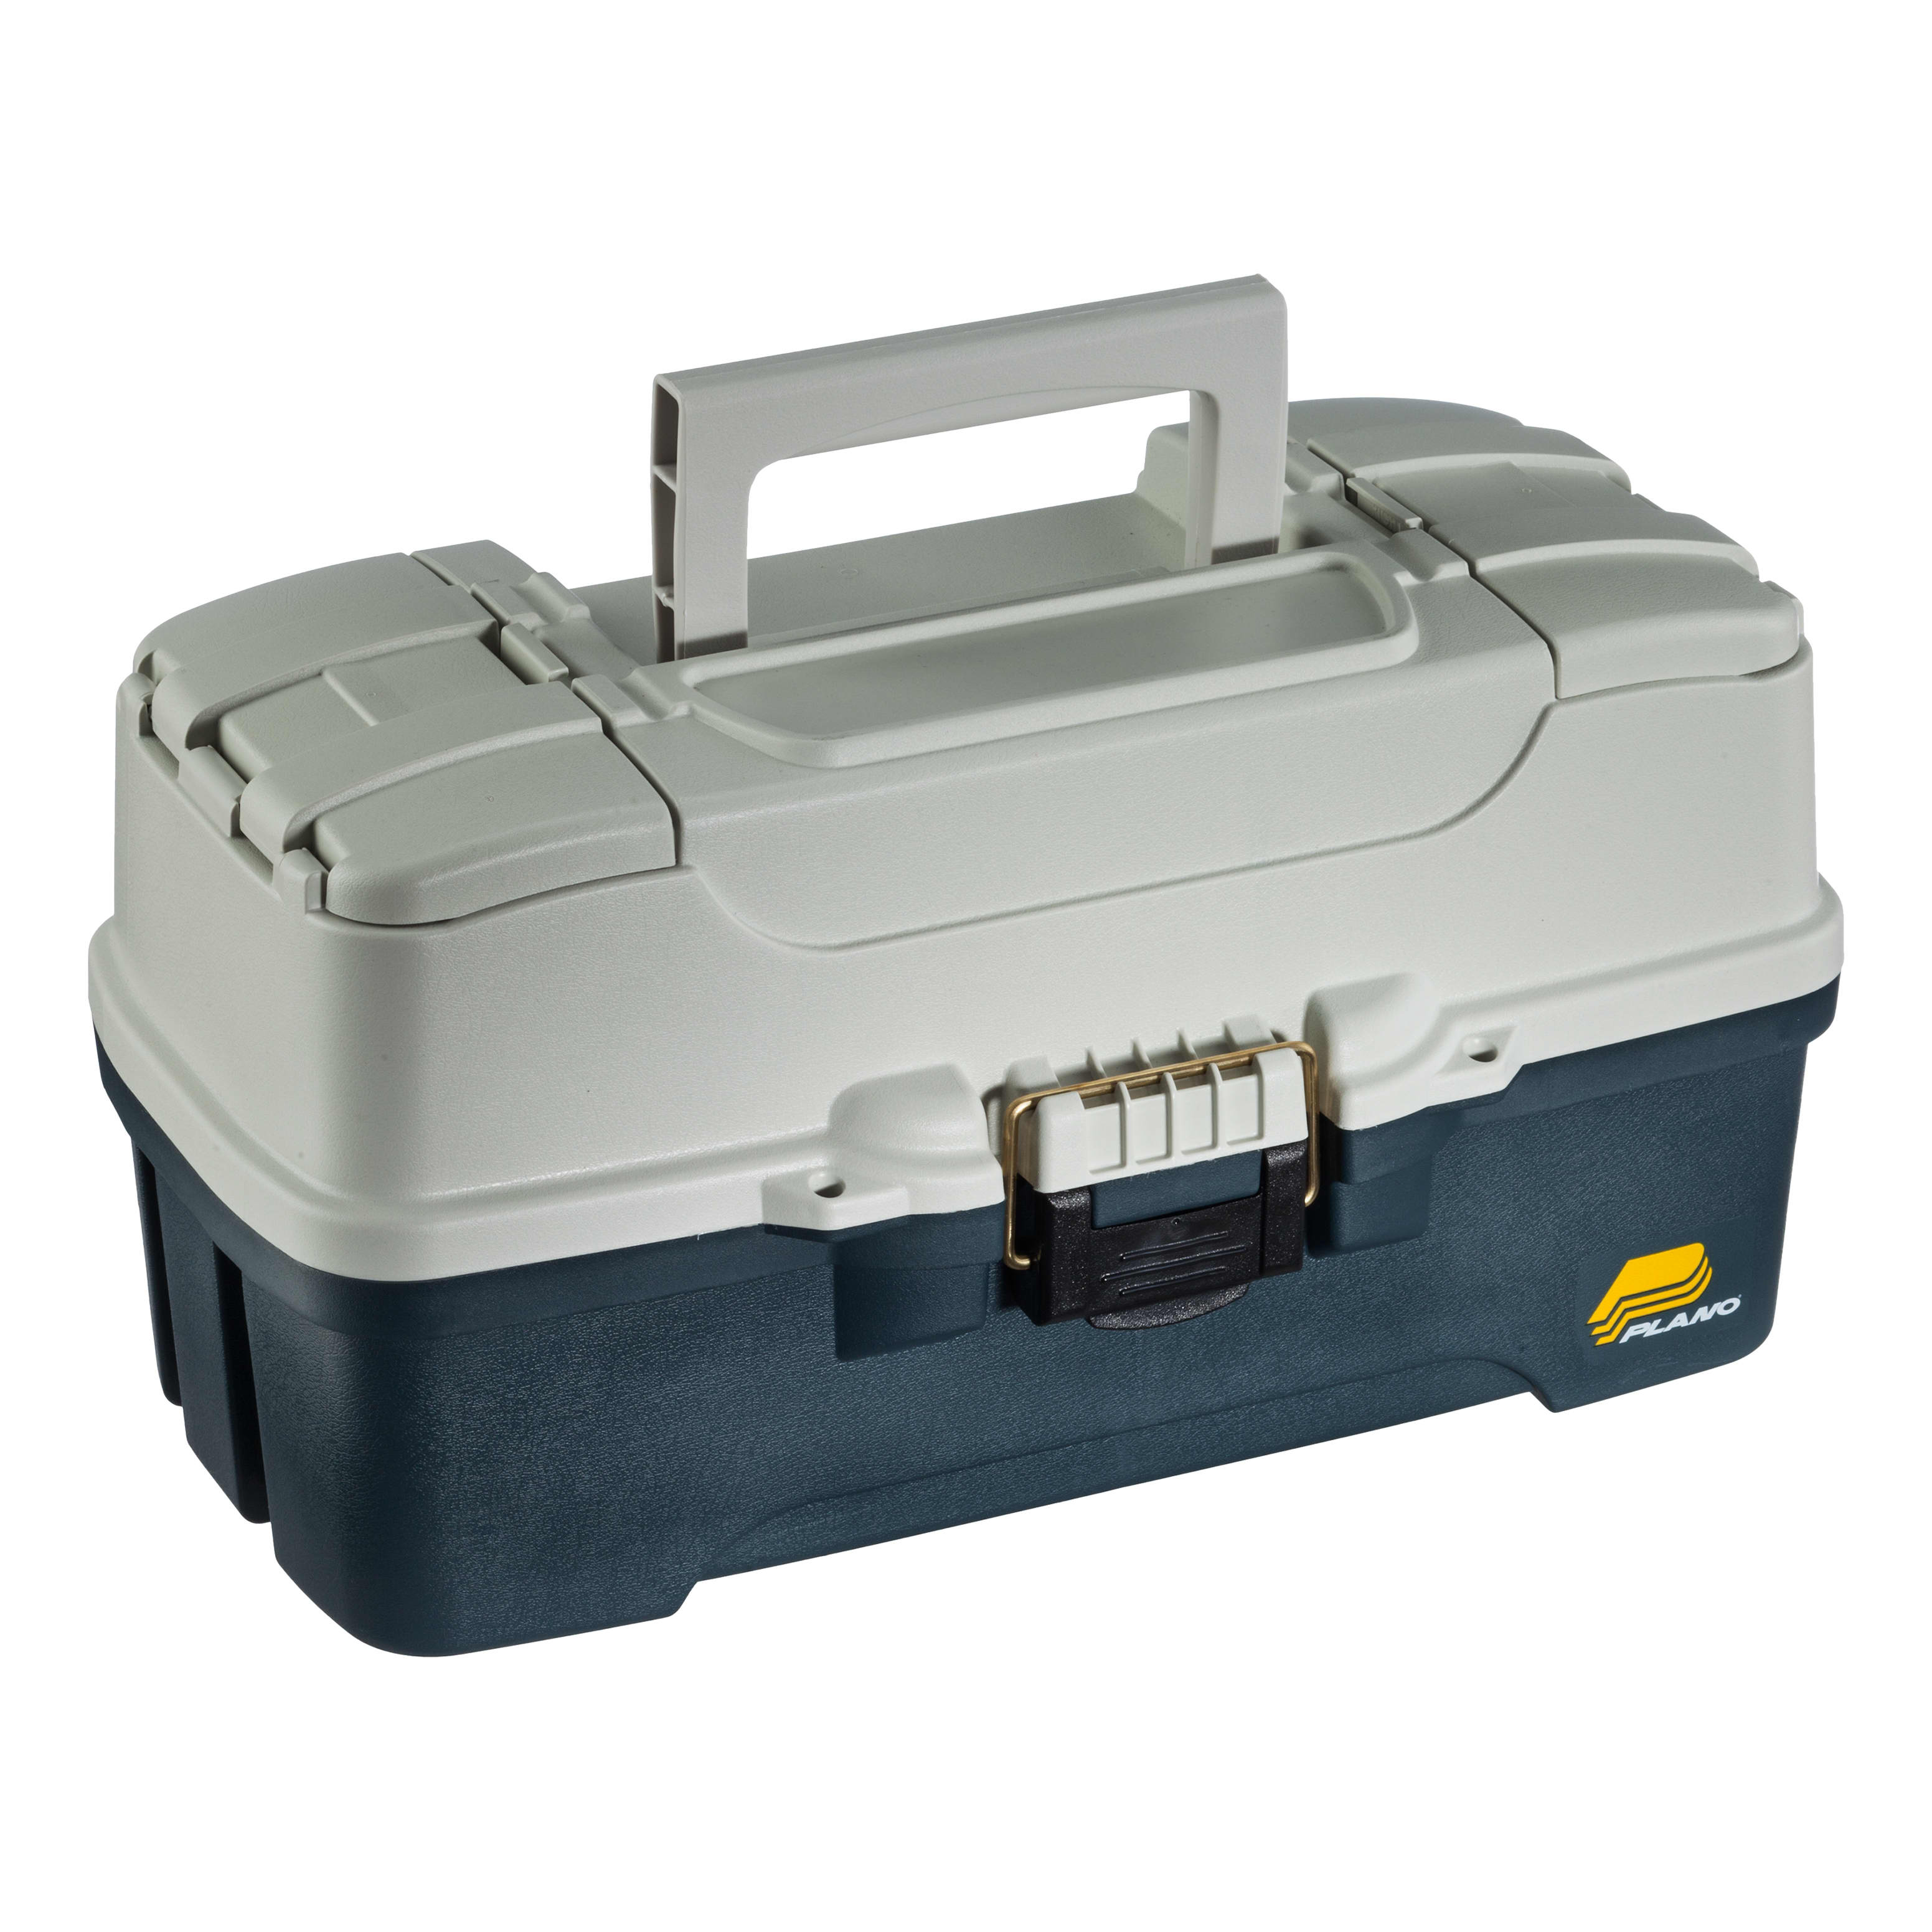 Plano small compact tackle box with goodies. - sporting goods - by